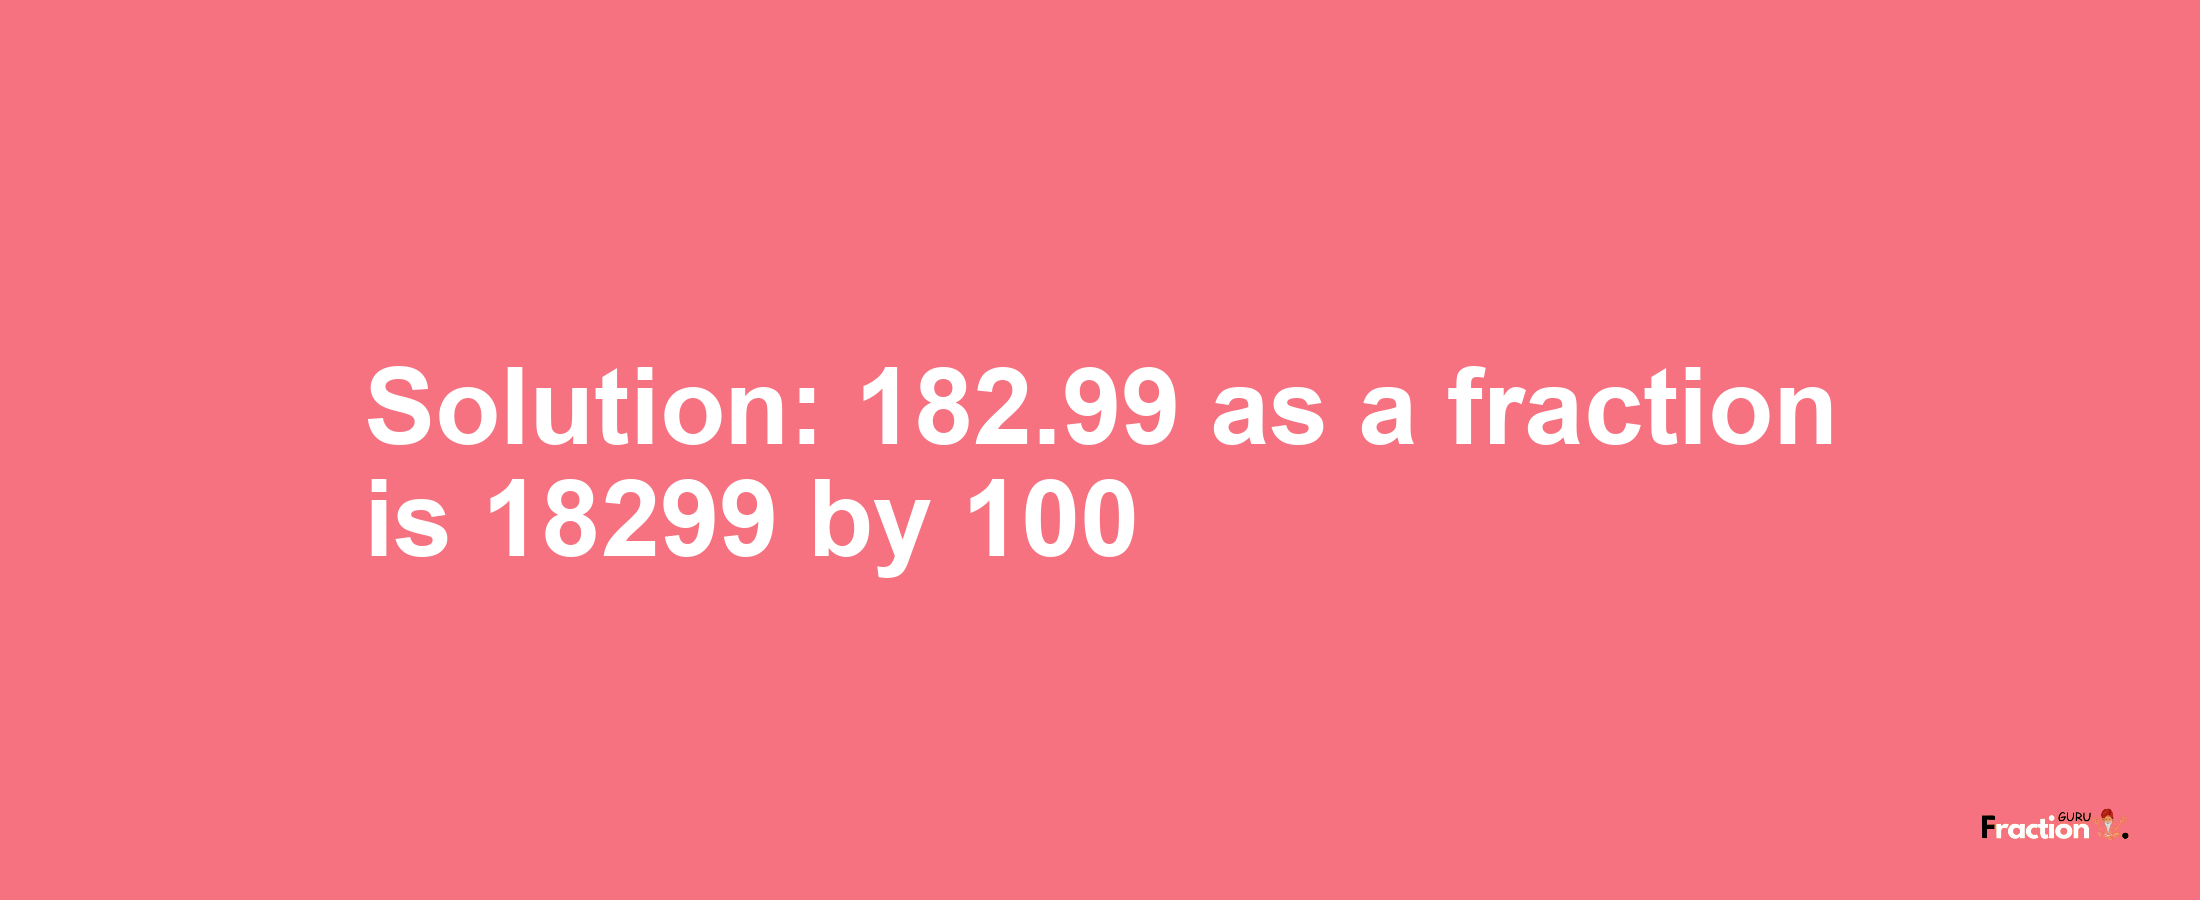 Solution:182.99 as a fraction is 18299/100